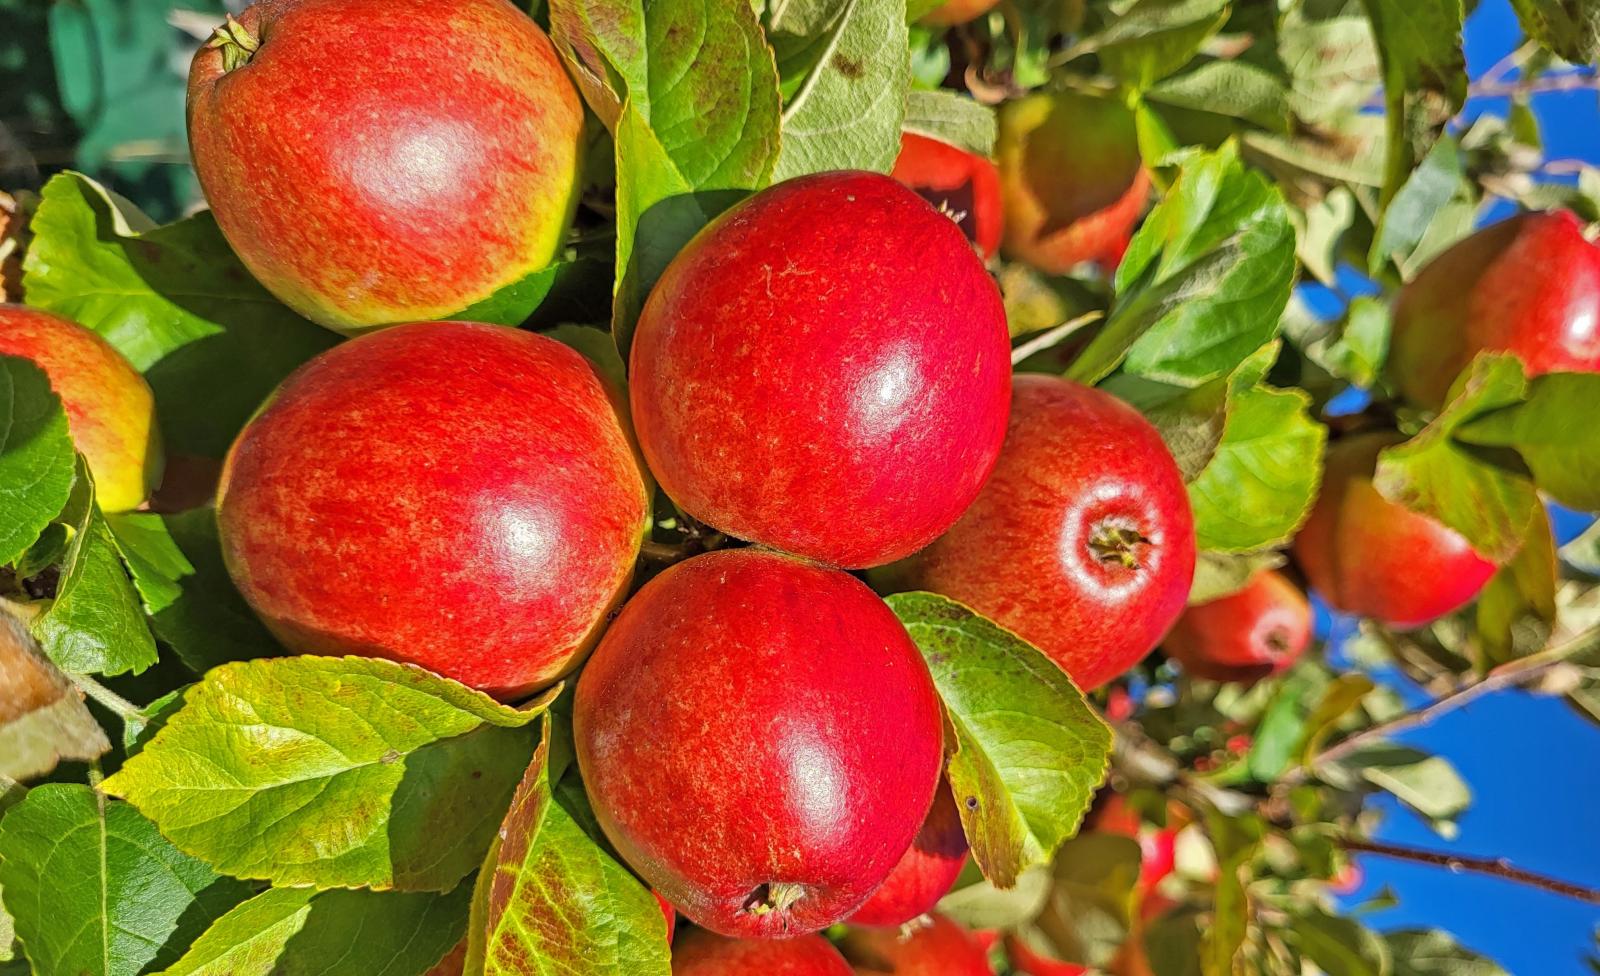 Ideal weather brings a bumper crop of British apples